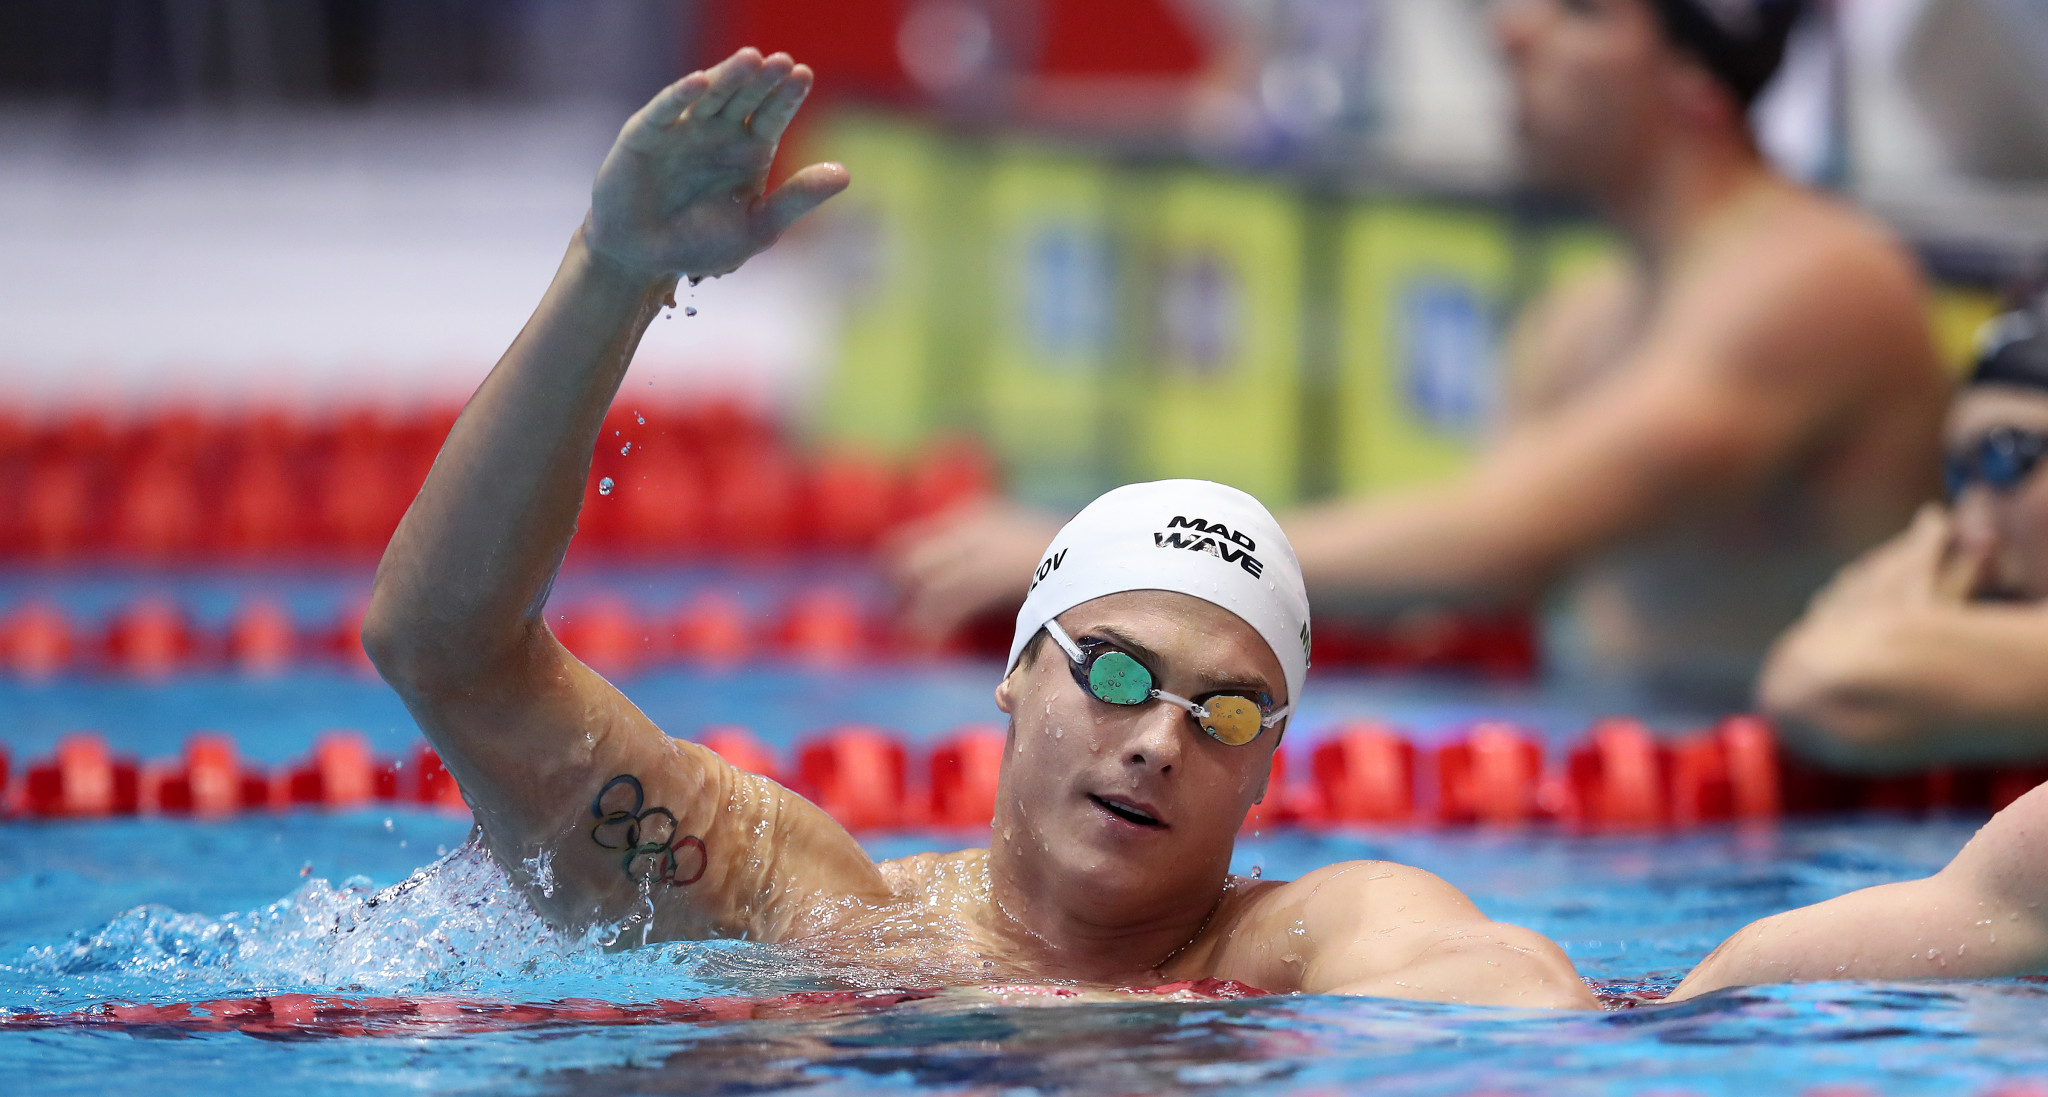 Morozov delights home crowd at FINA World Cup in Kazan